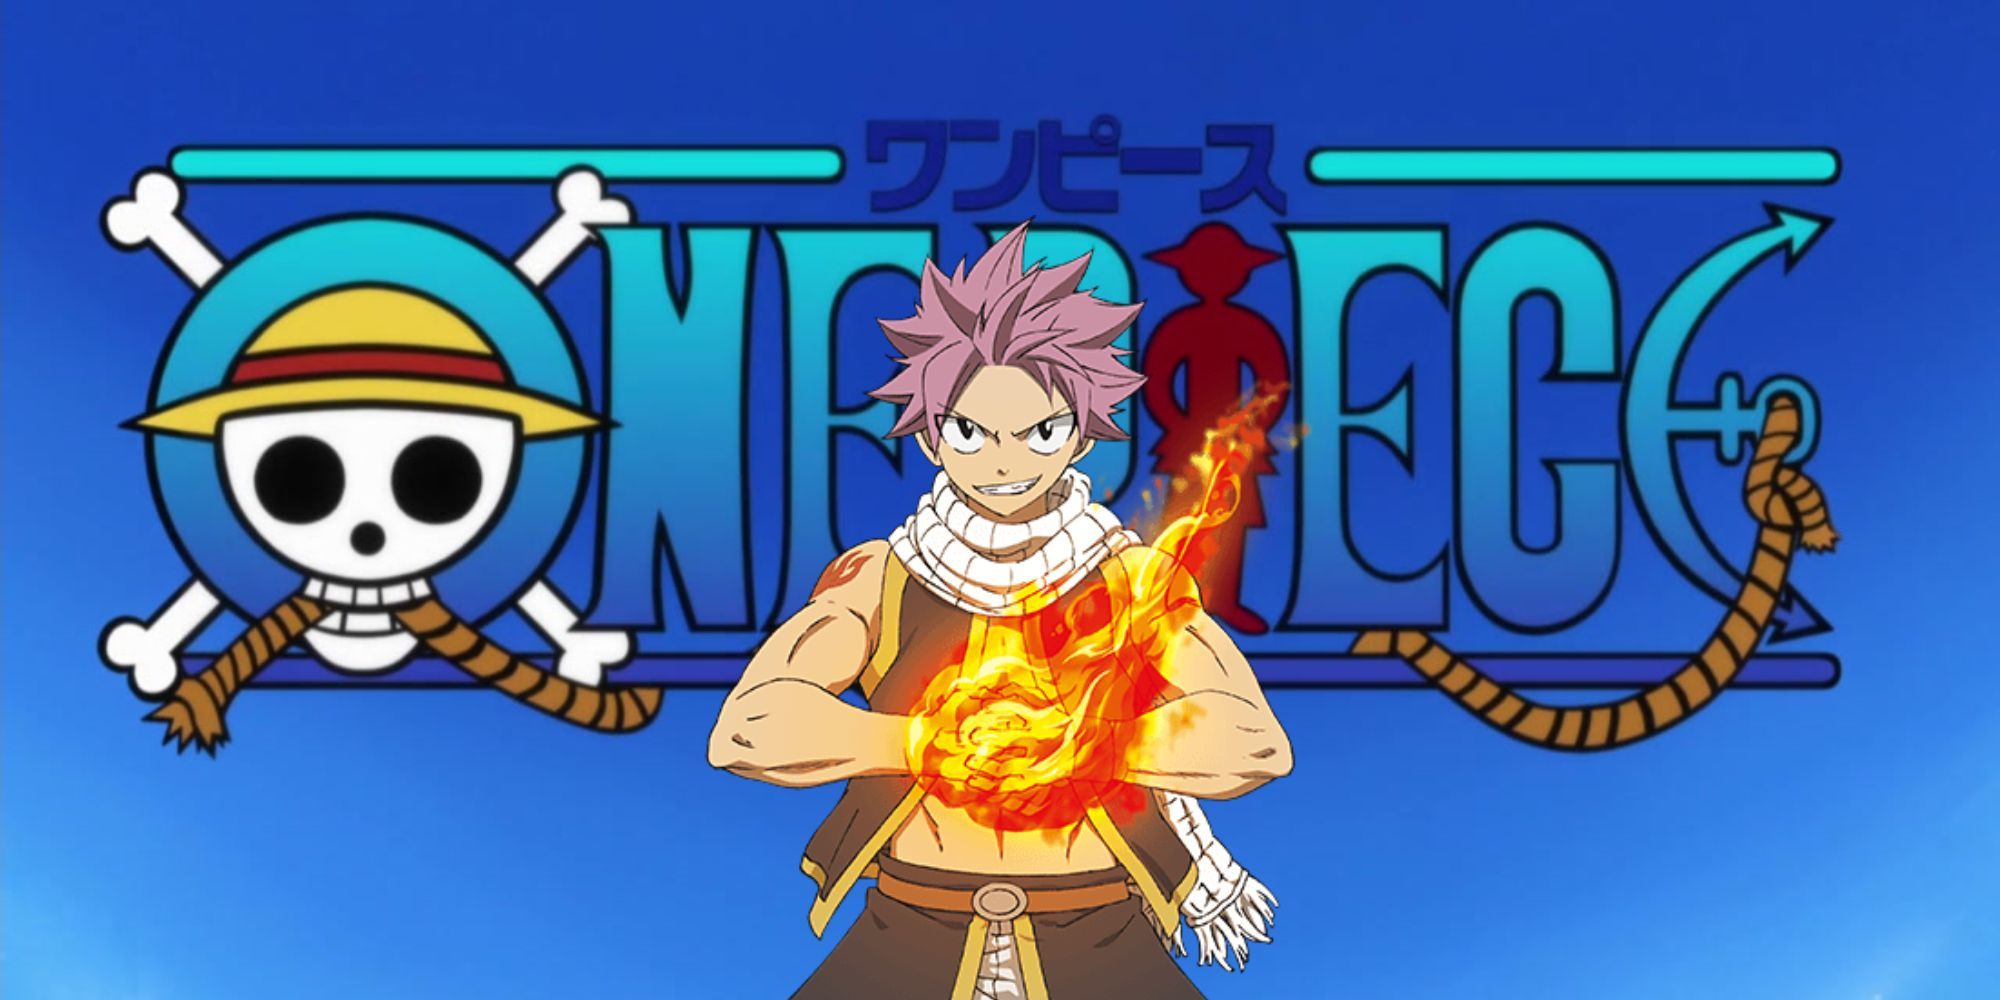 anna hurt recommends Fairy Tail One Piece